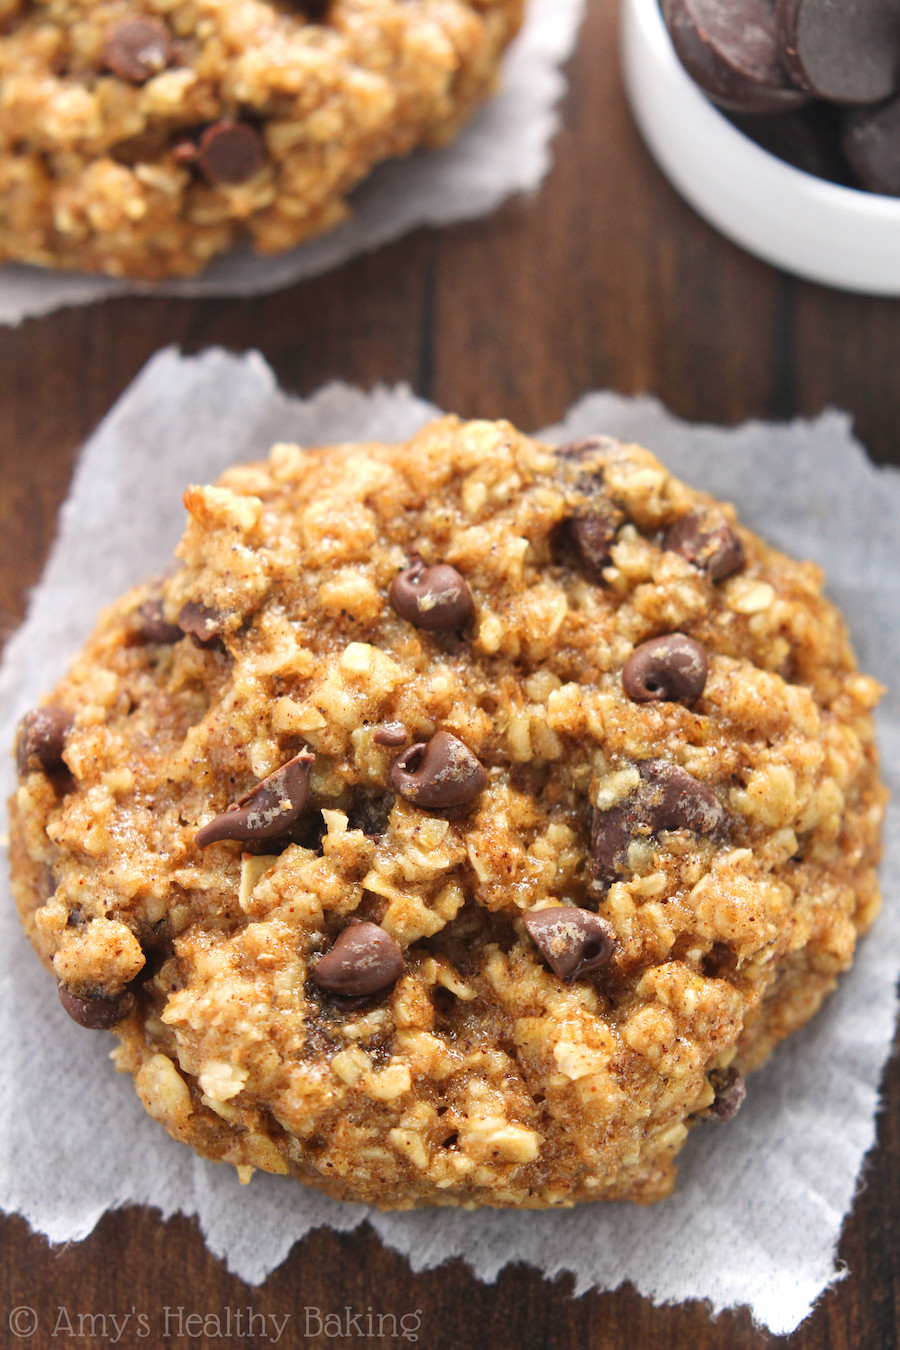 Recipes For Oatmeal Cookies
 Chocolate Chip Banana Bread Oatmeal Cookies